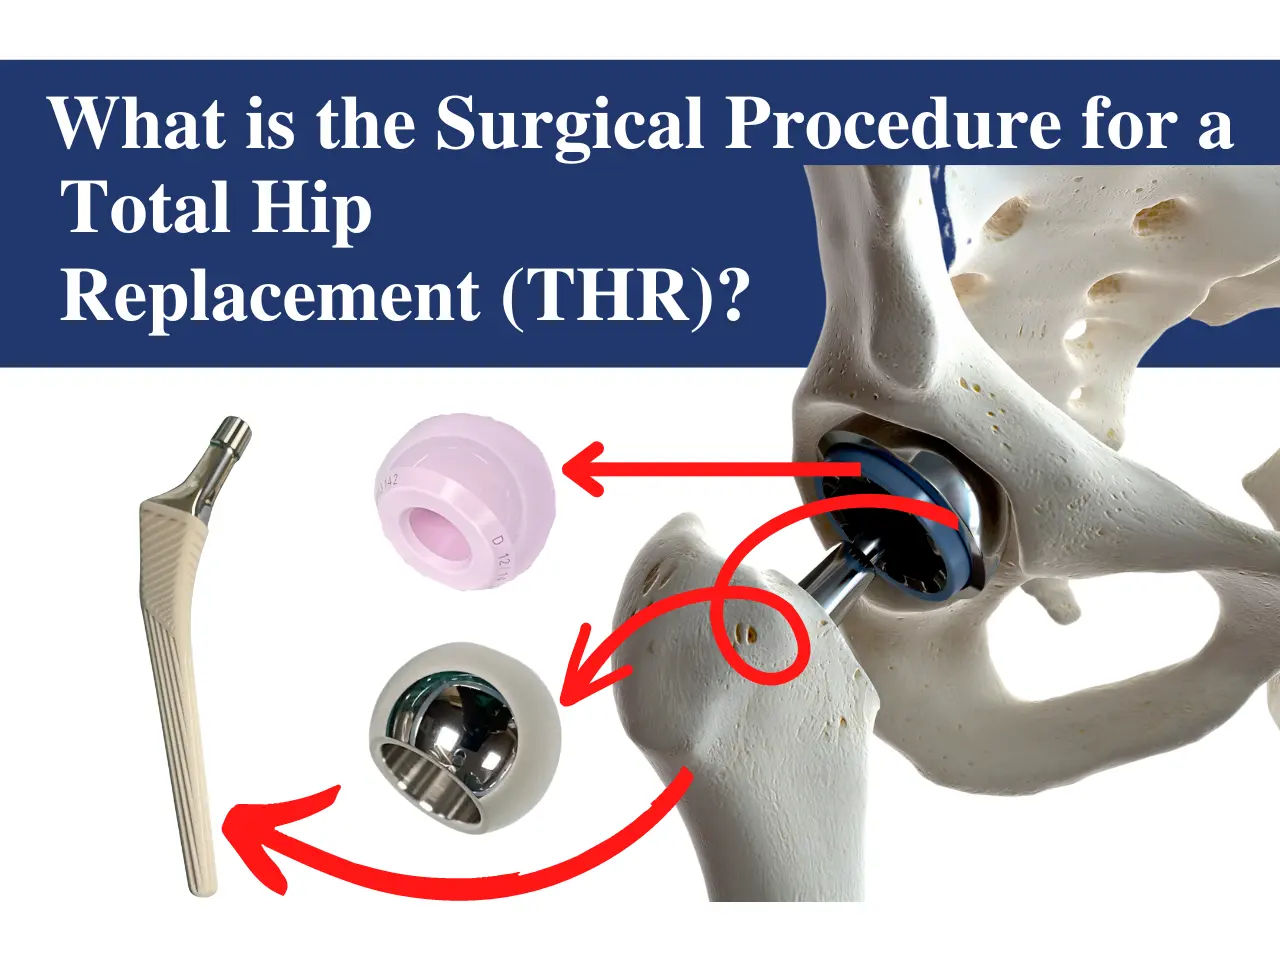 What is Total Hip Replacement Surgical Procedure?